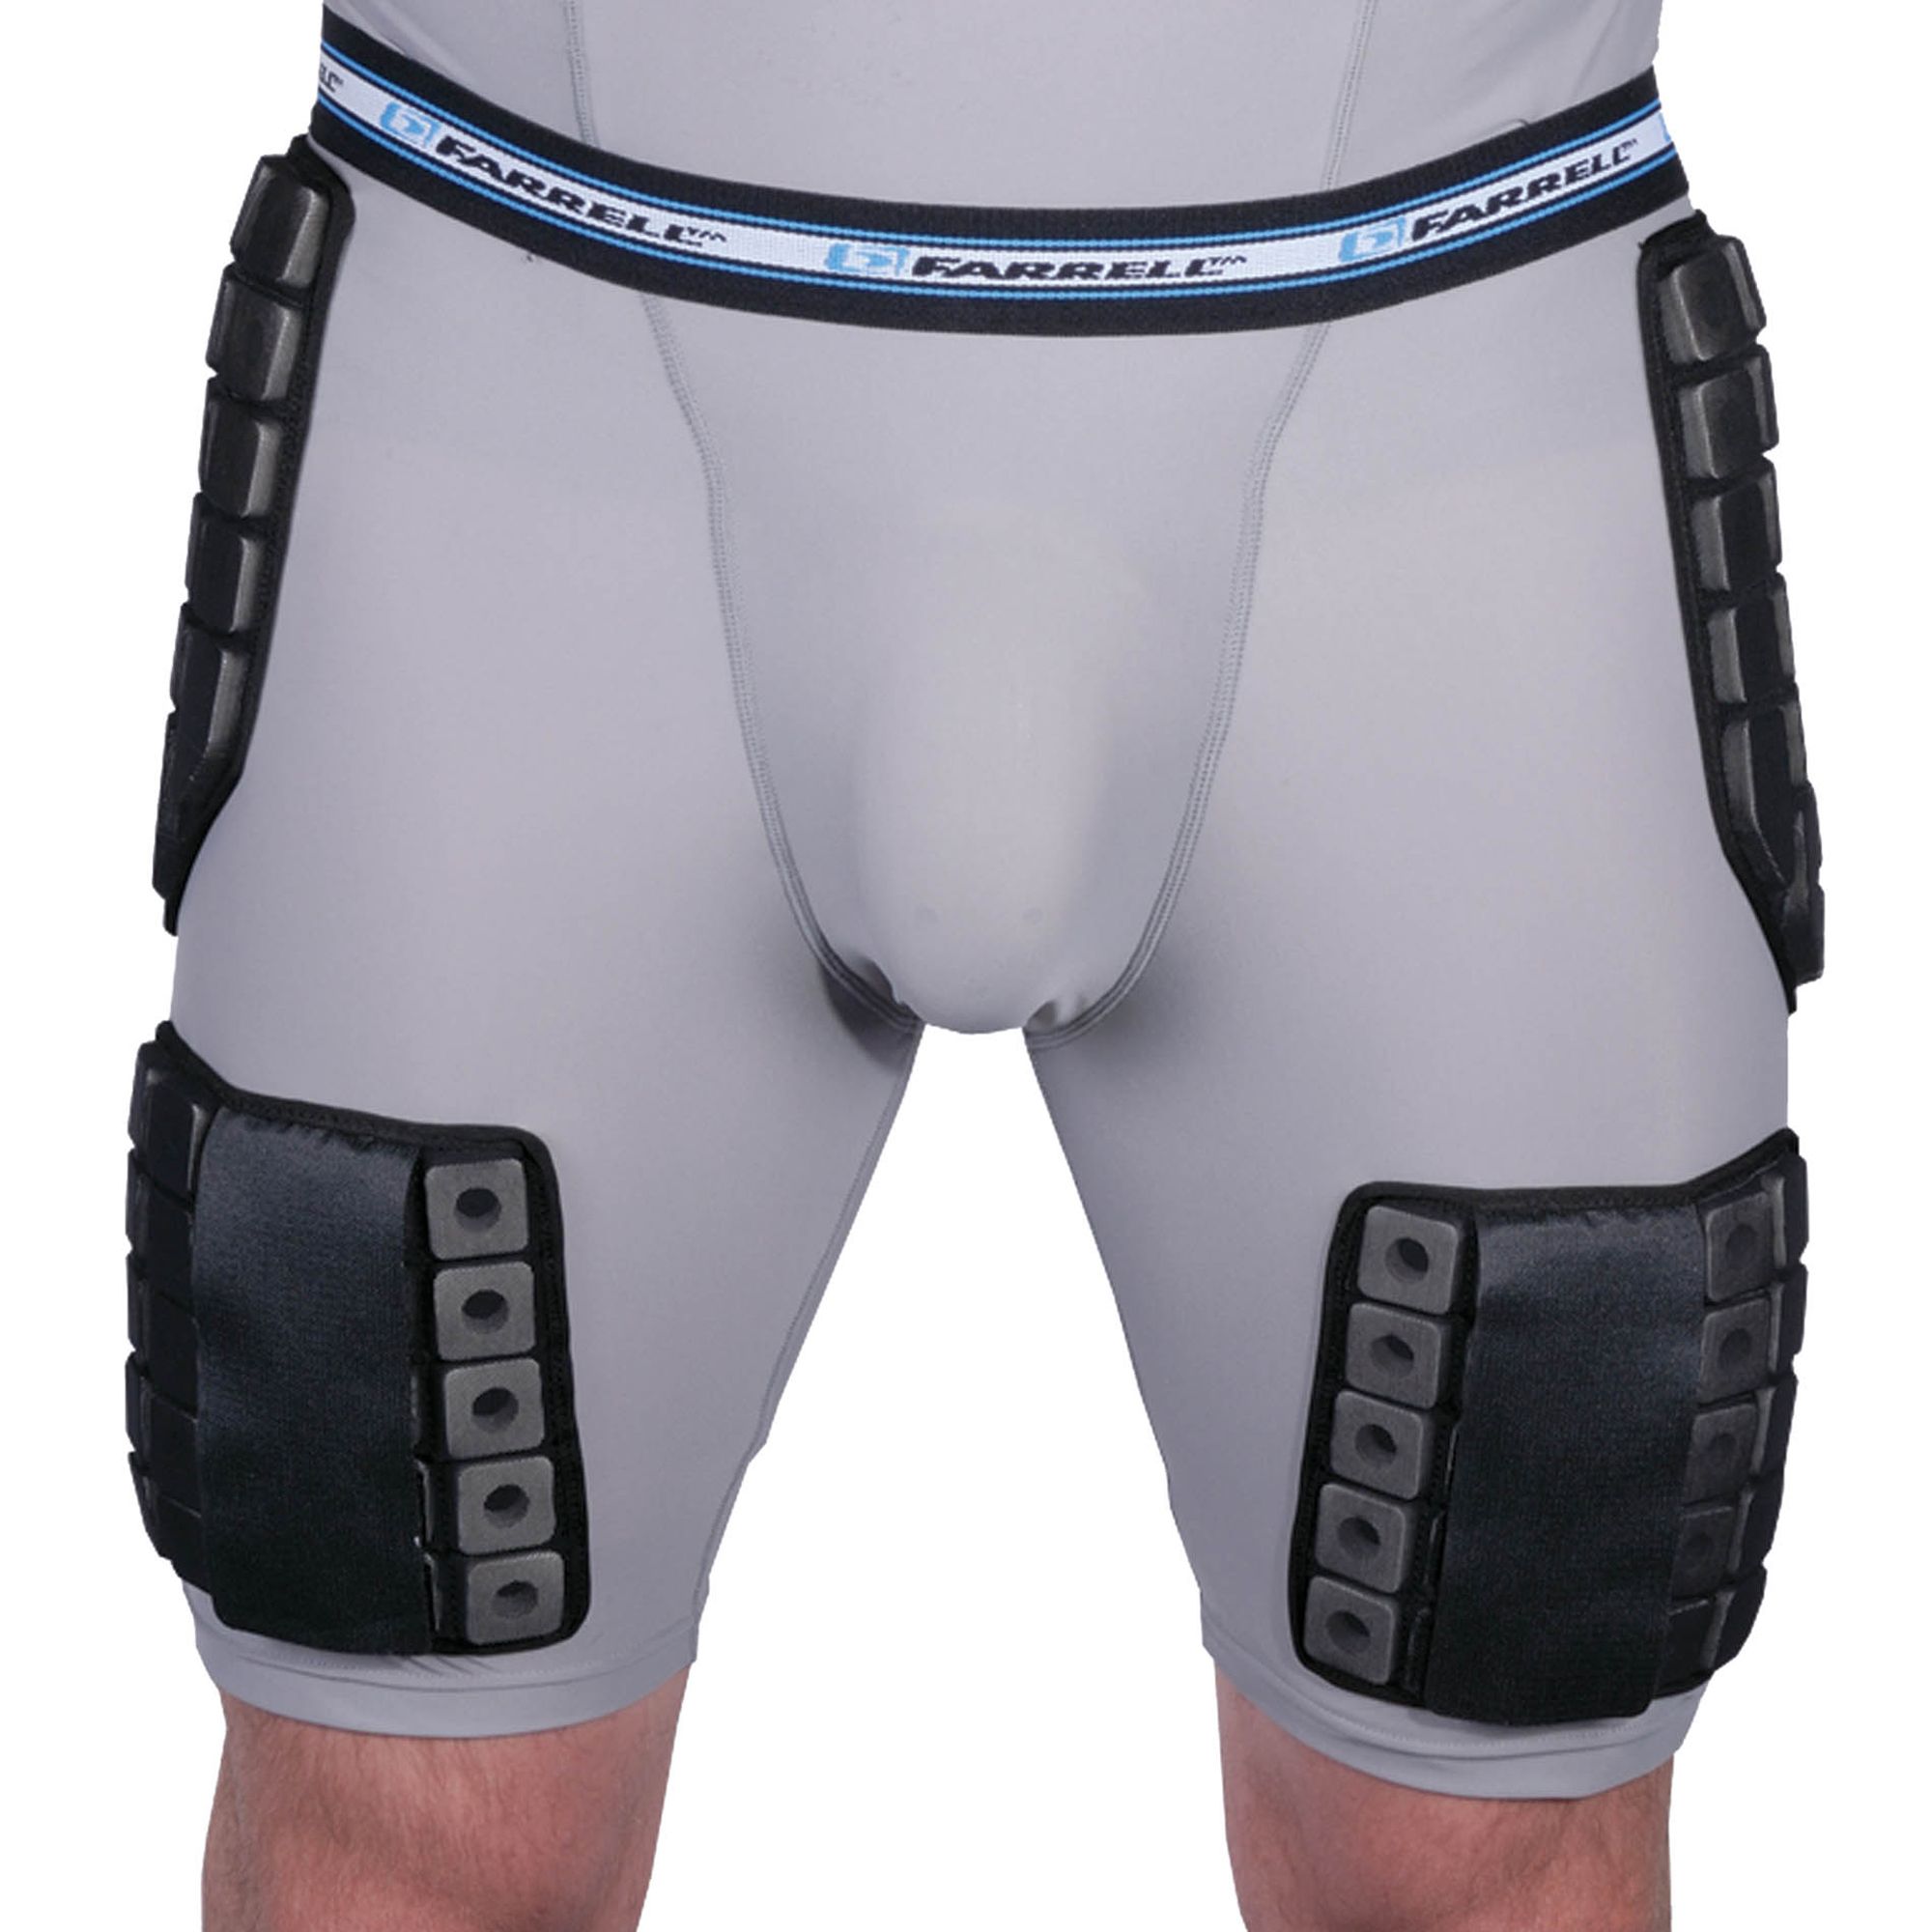 Protective Hockey Shorts with Velcro Attachments - Adult